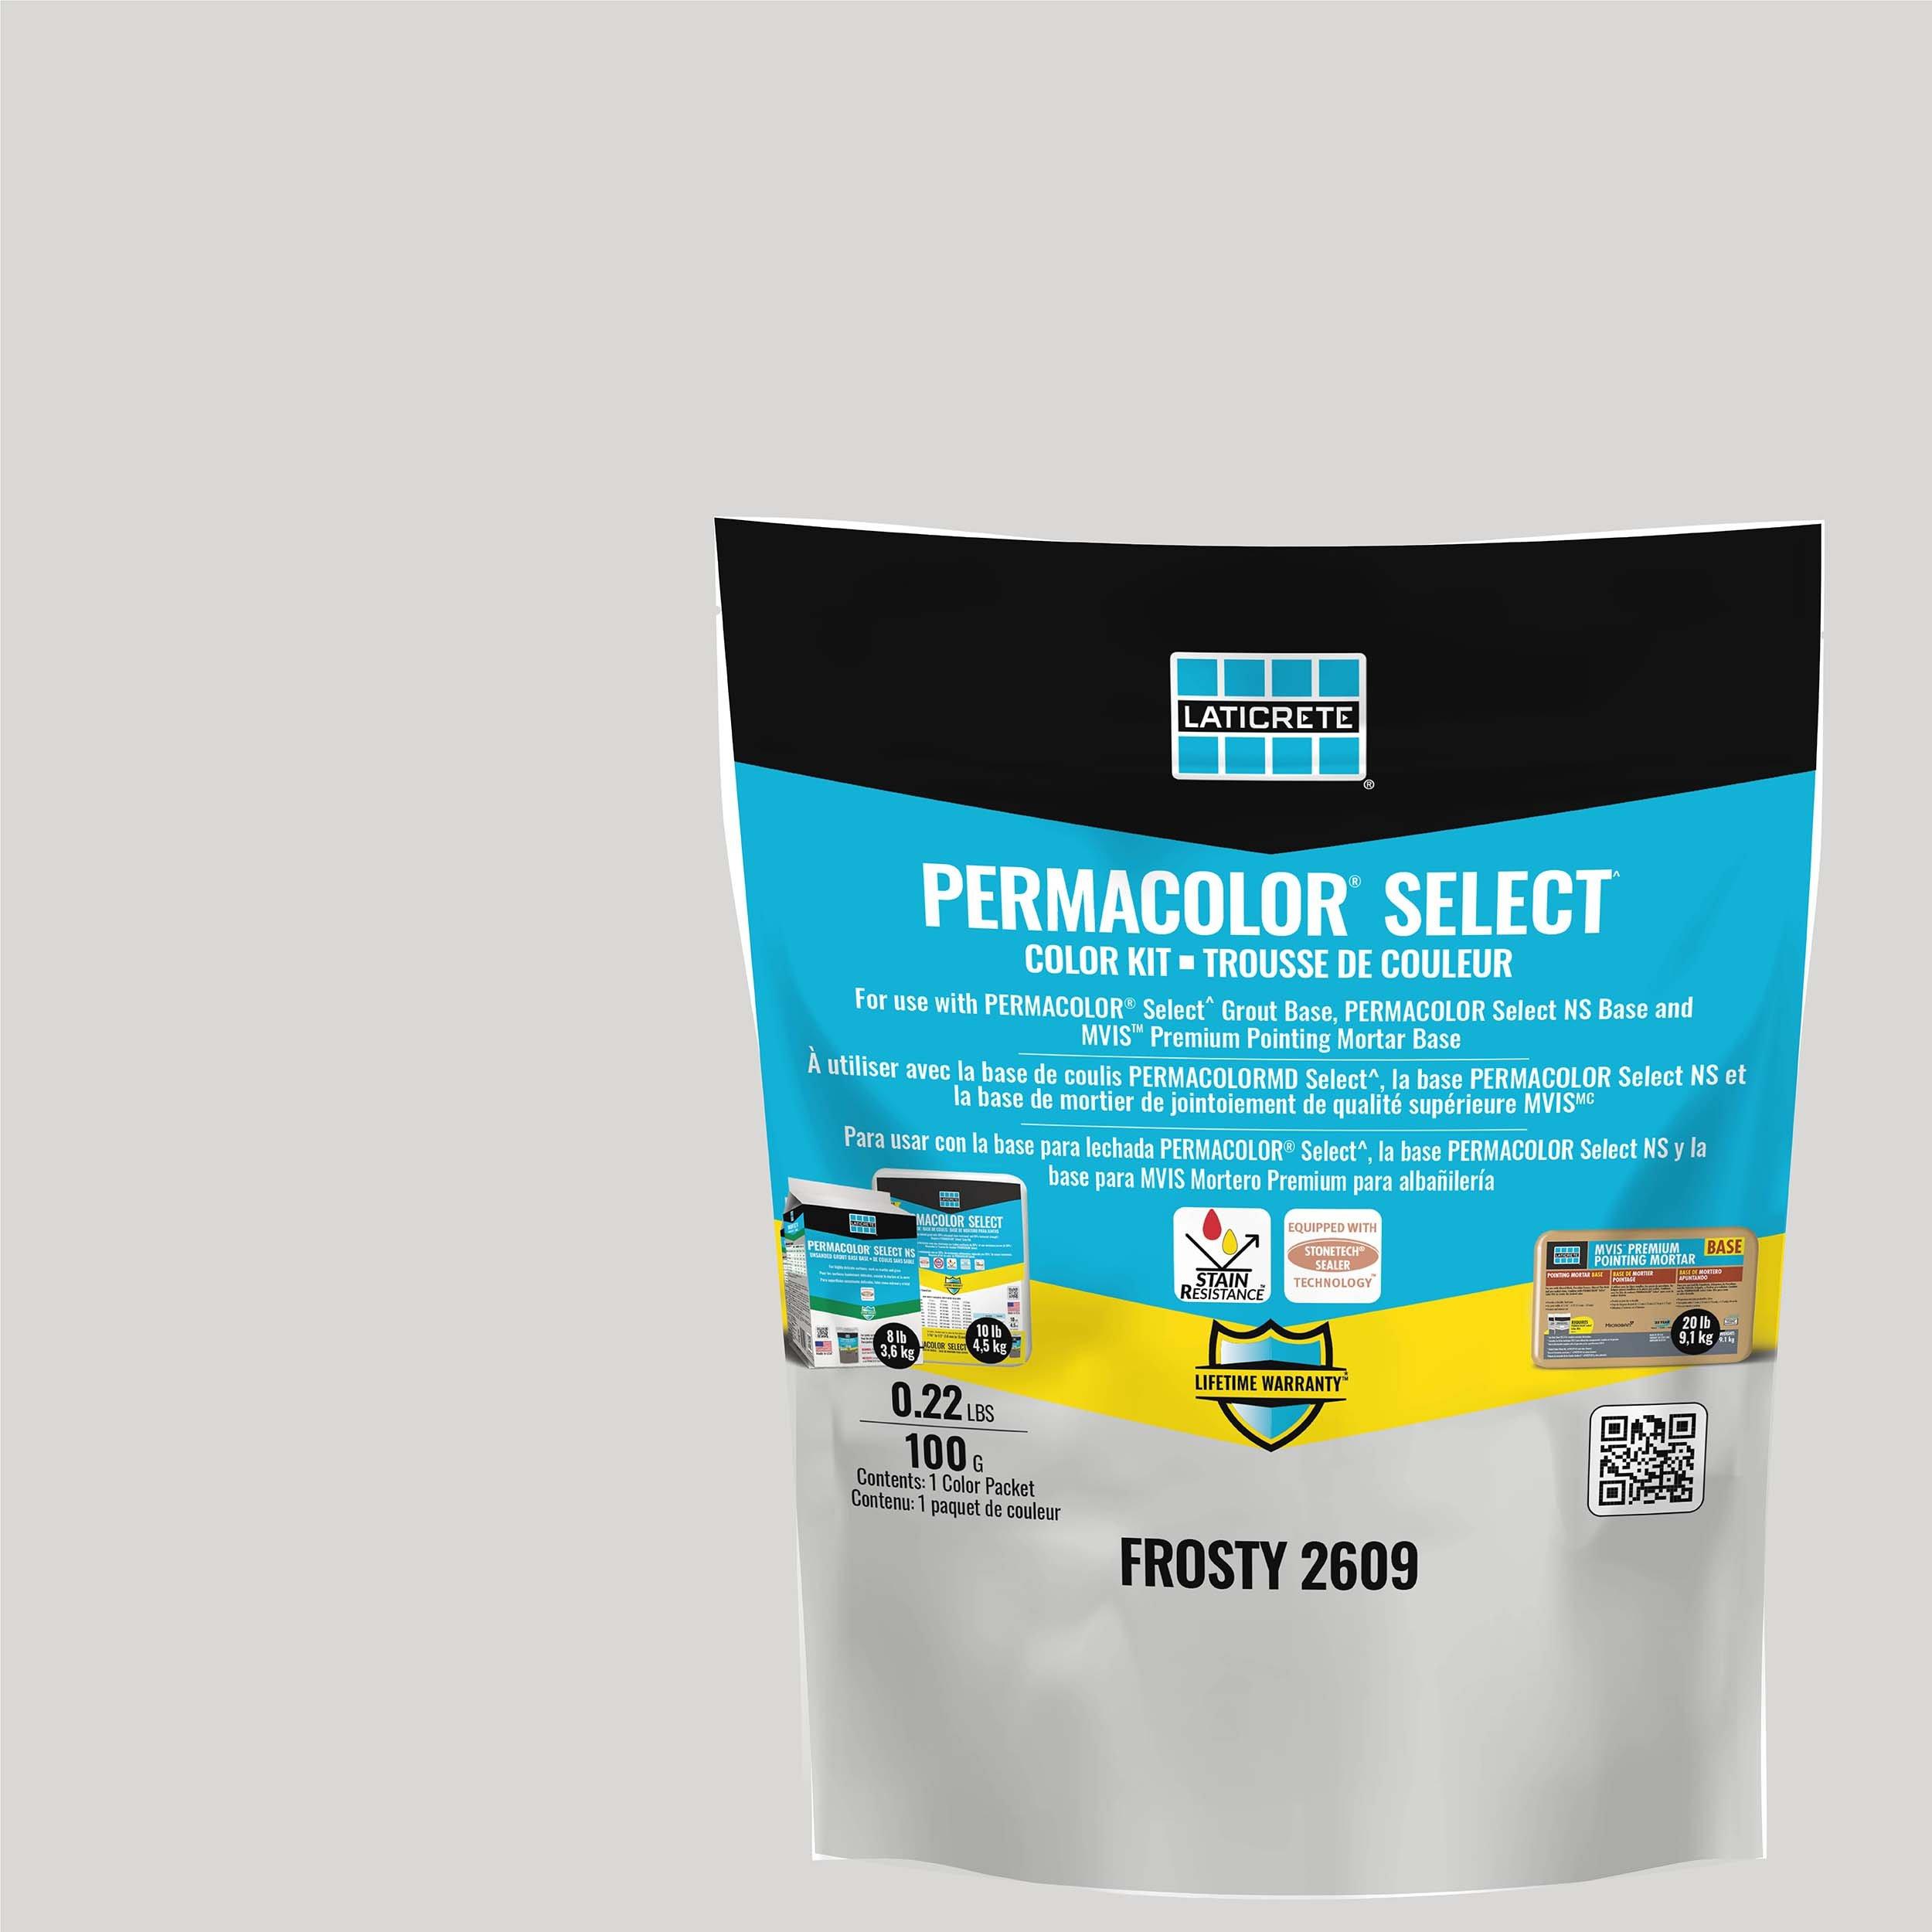 Laticrete 09 Permacolor Select Frosty Grout | Floor and Decor